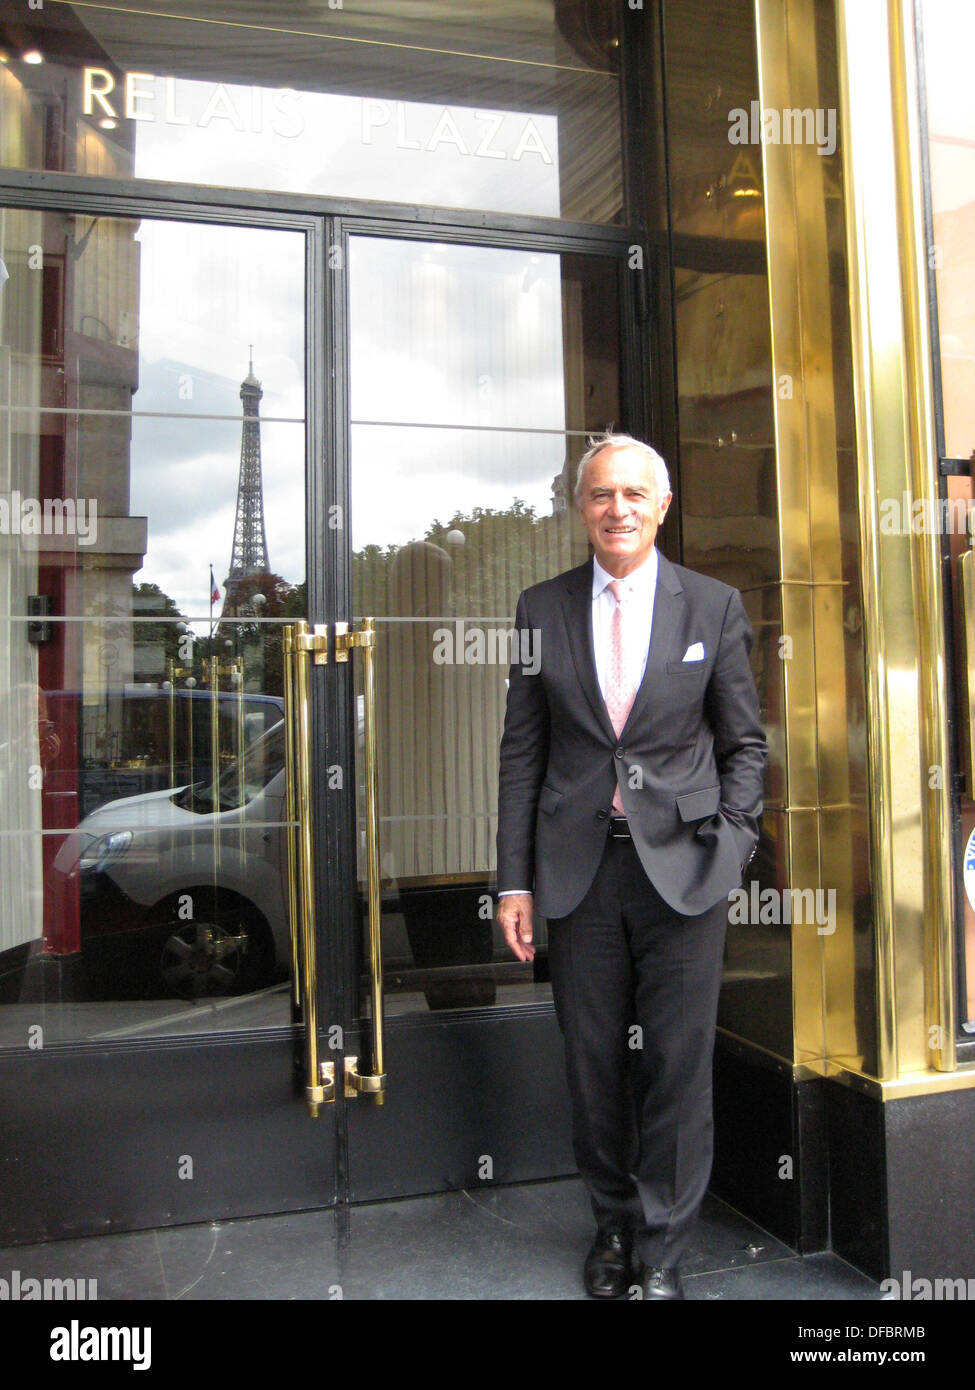 FILE - An archive photo dated 26 June 2013 shows German restaurant manager Werner Kuechler standing in the restaurant 'Relais Plaza' in Paris, France. He had a bumpy start in the city. His suitcase was stolen at the station when he arrived in Paris back in the 1960's and his favorite hotel didn't hire him as a waiter at first. Four decades later, Kuechler is the manager of the 'Relais Plaza,' the smaller of the two restaurants in the 'Plaza Athénée.' Photo: Gerd Roth Stock Photo